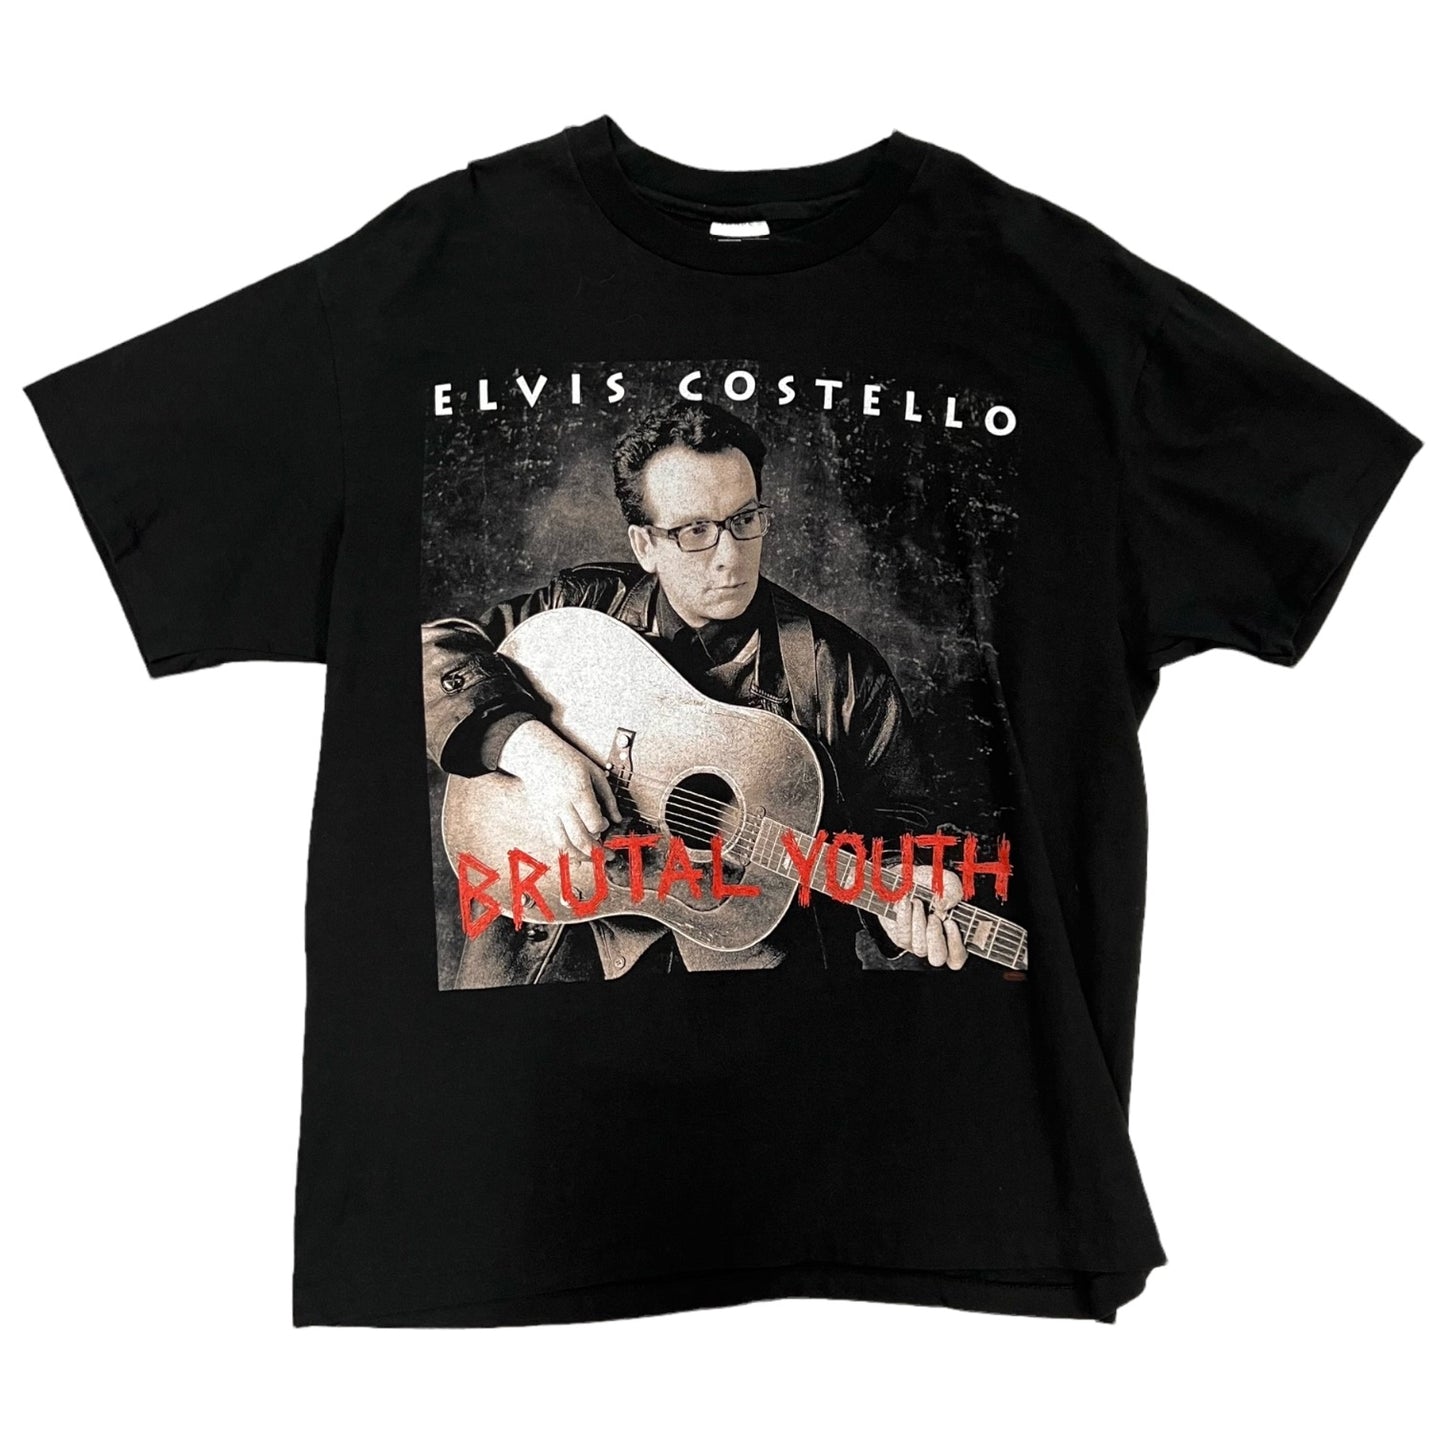 1994 Elvis Costello "Brutal Youth tour" vintage tee